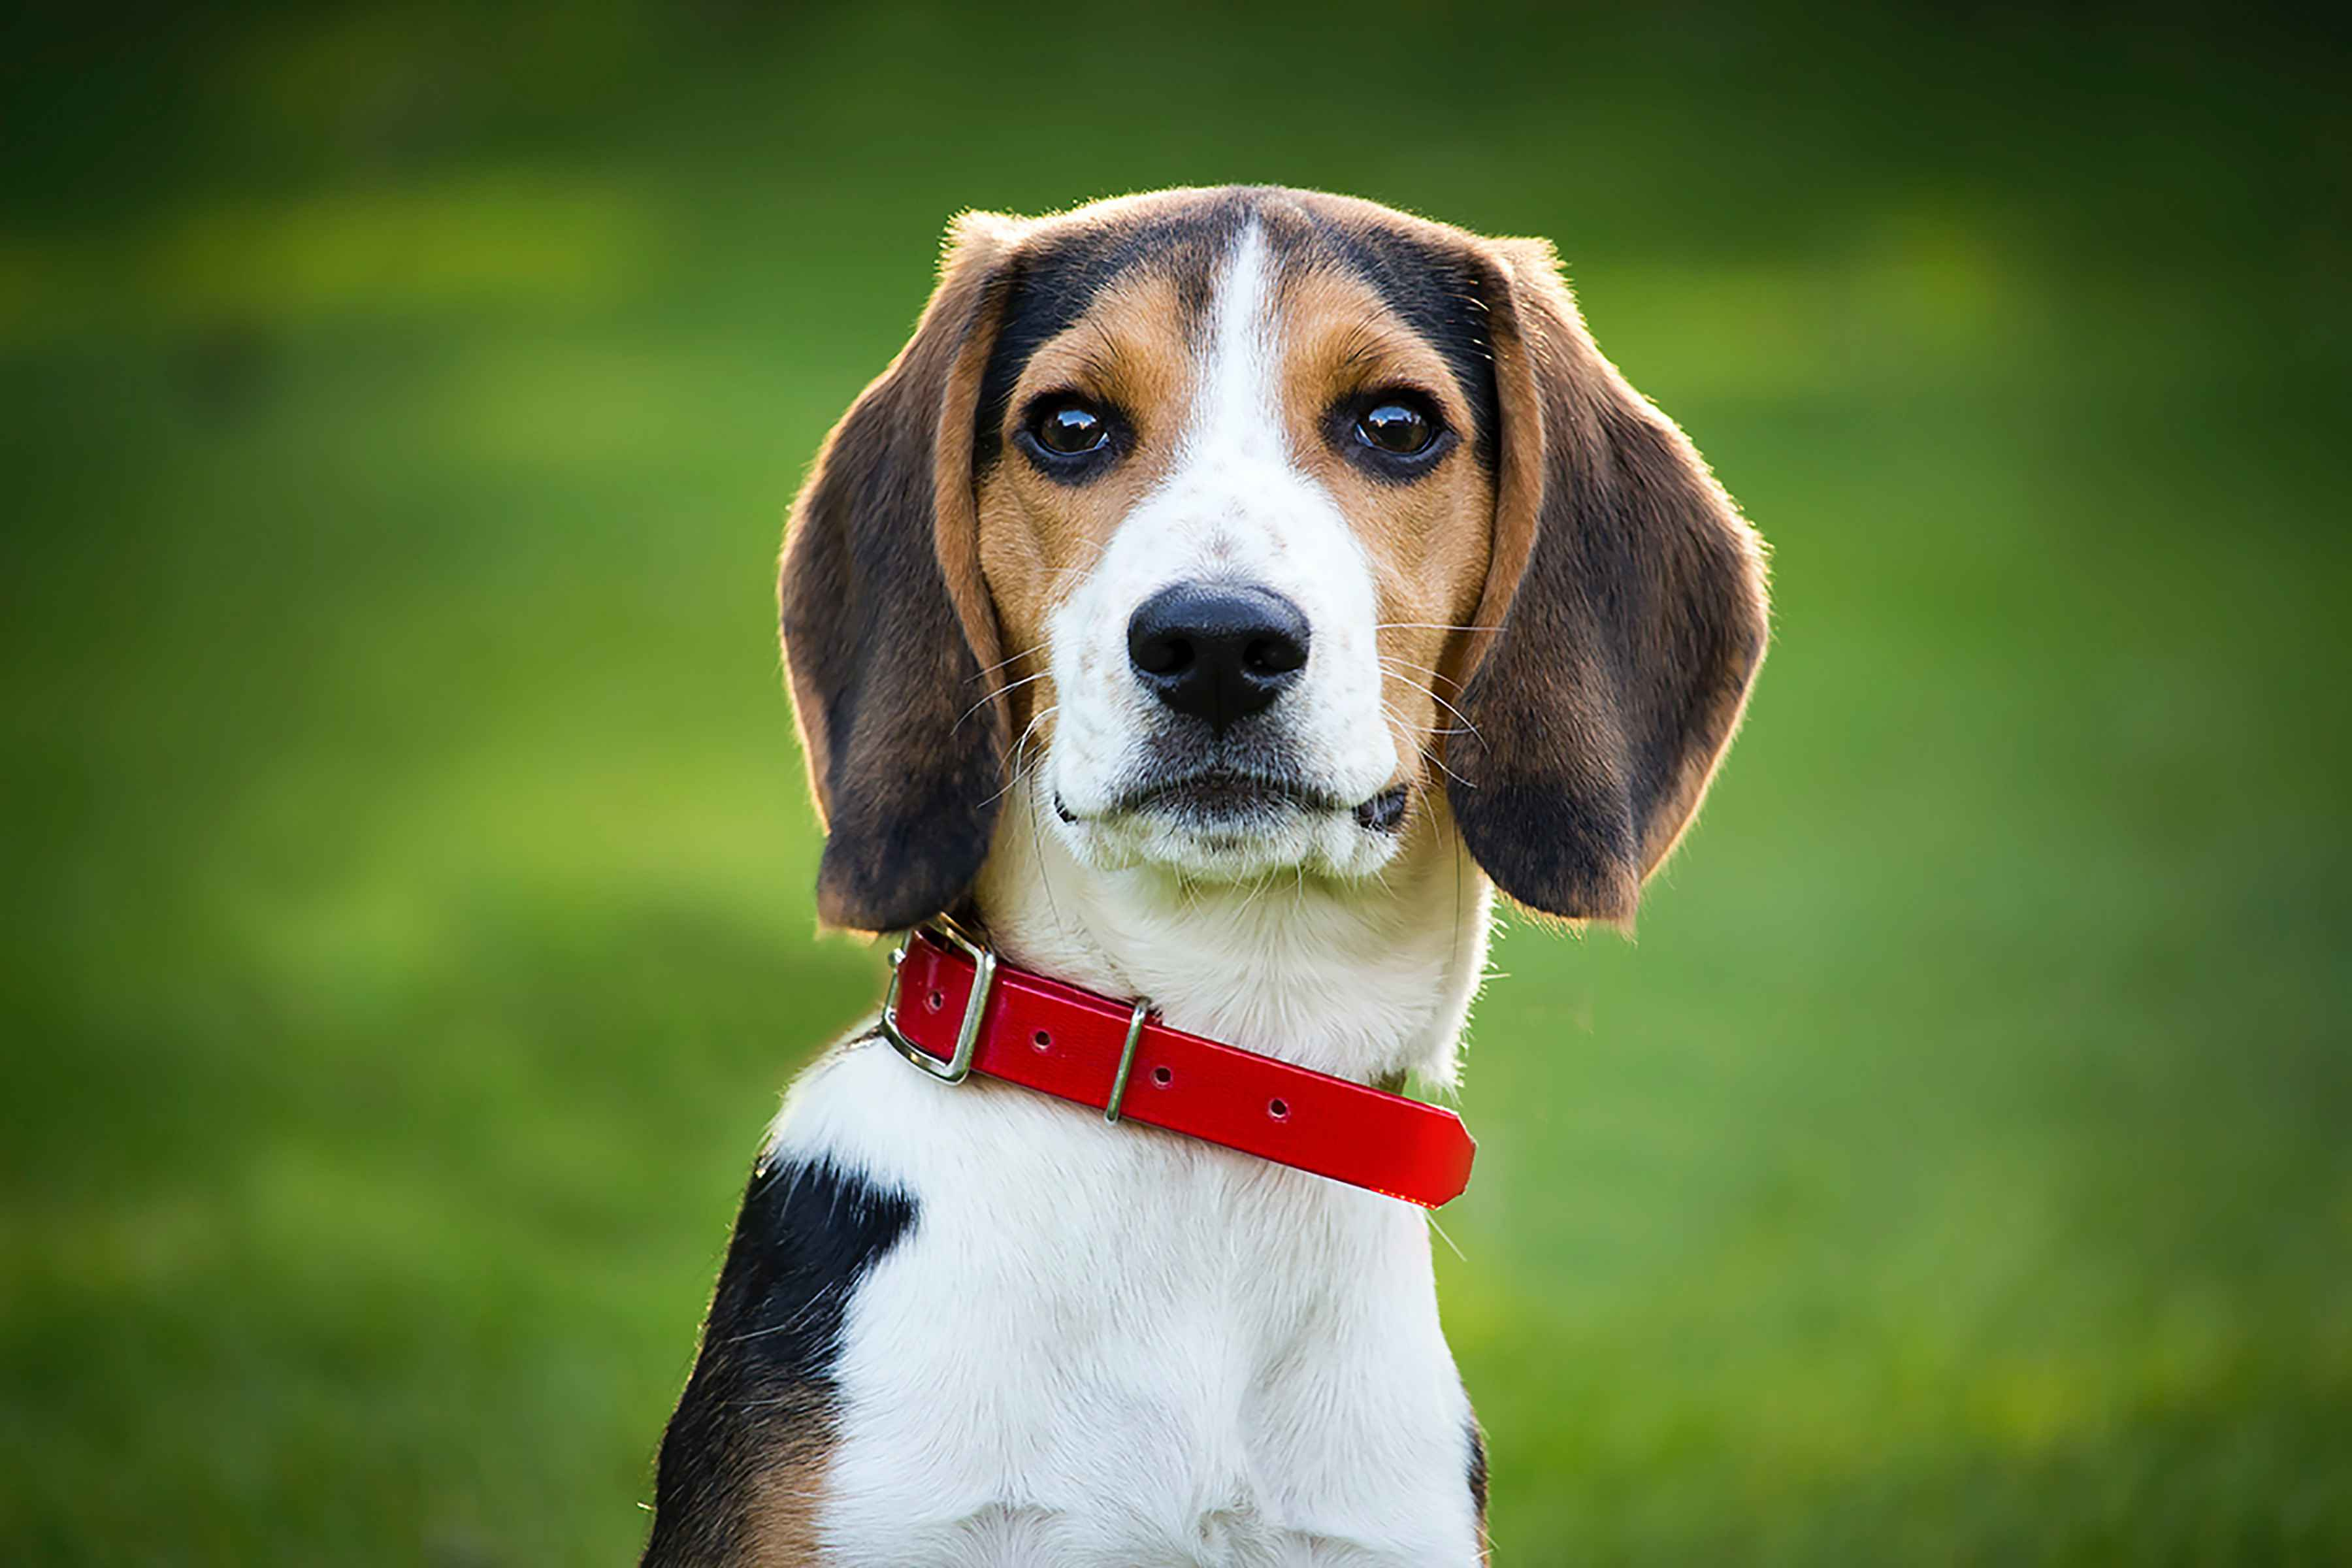 Beagles and Small Animals: Can They Coexist Comfortably?